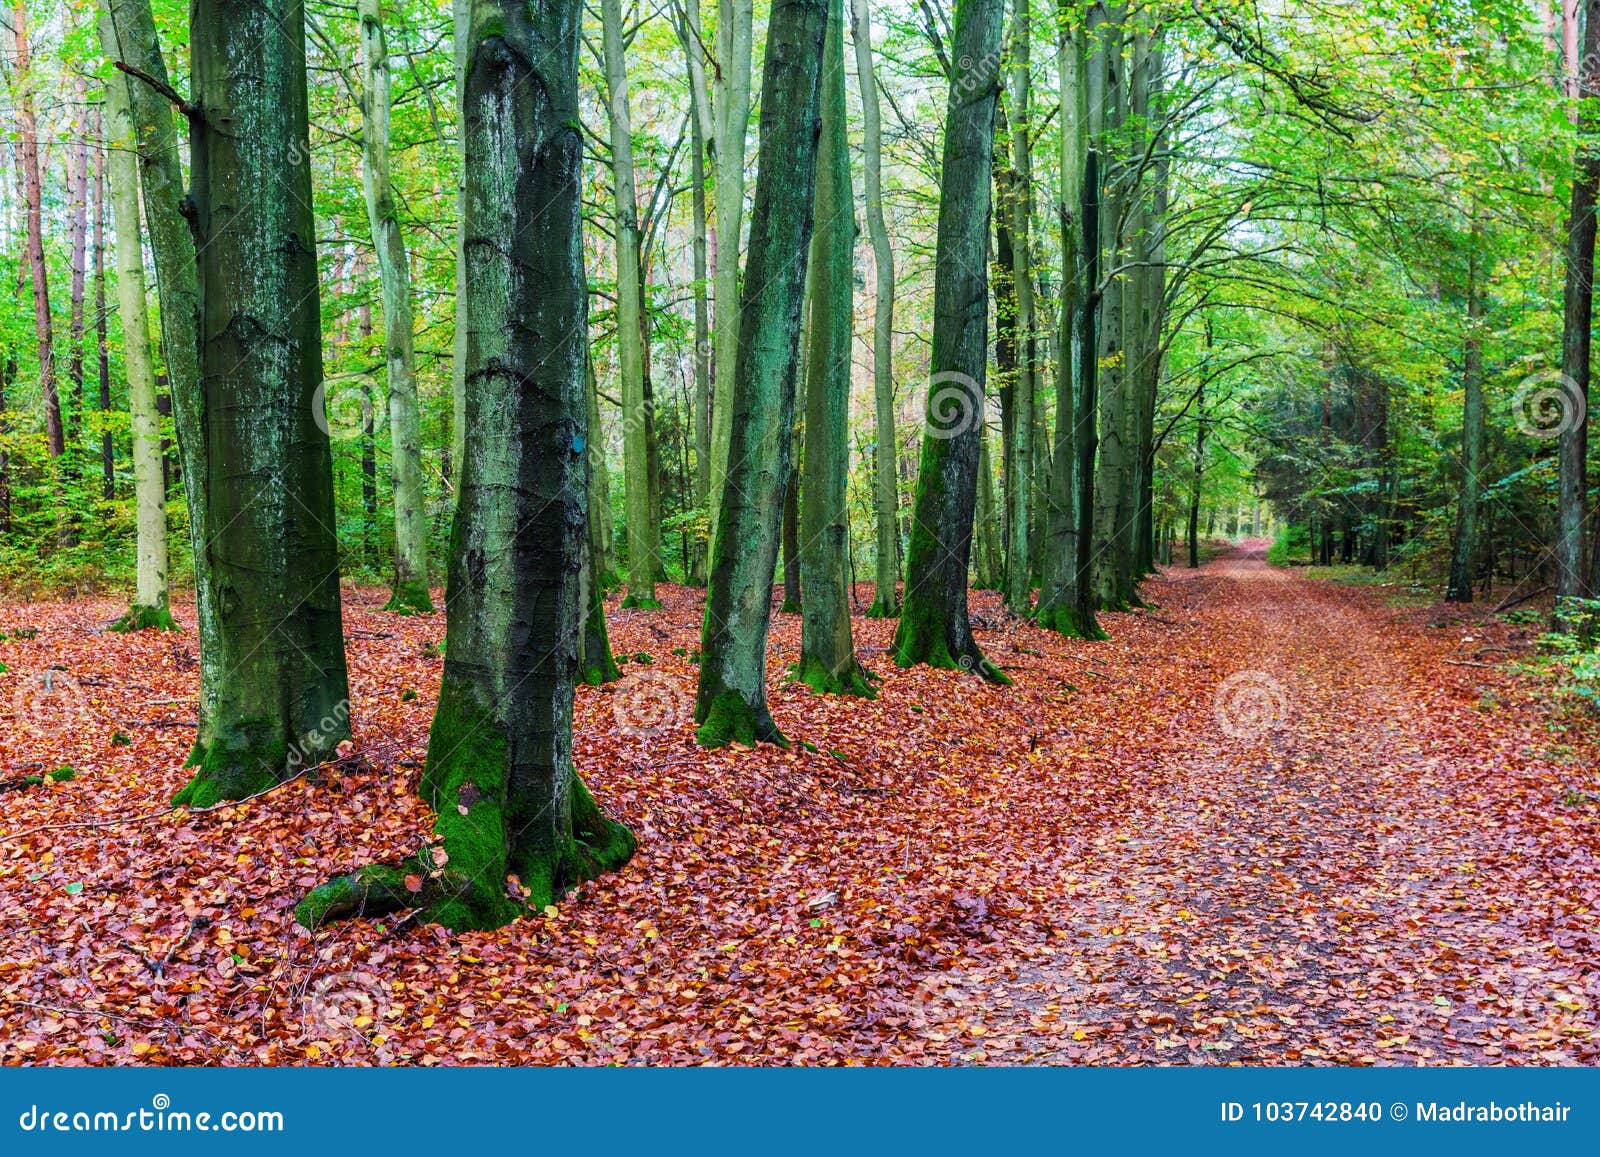 Beech Forest With Forest Path In Autumn Stock Photo Image Of Season